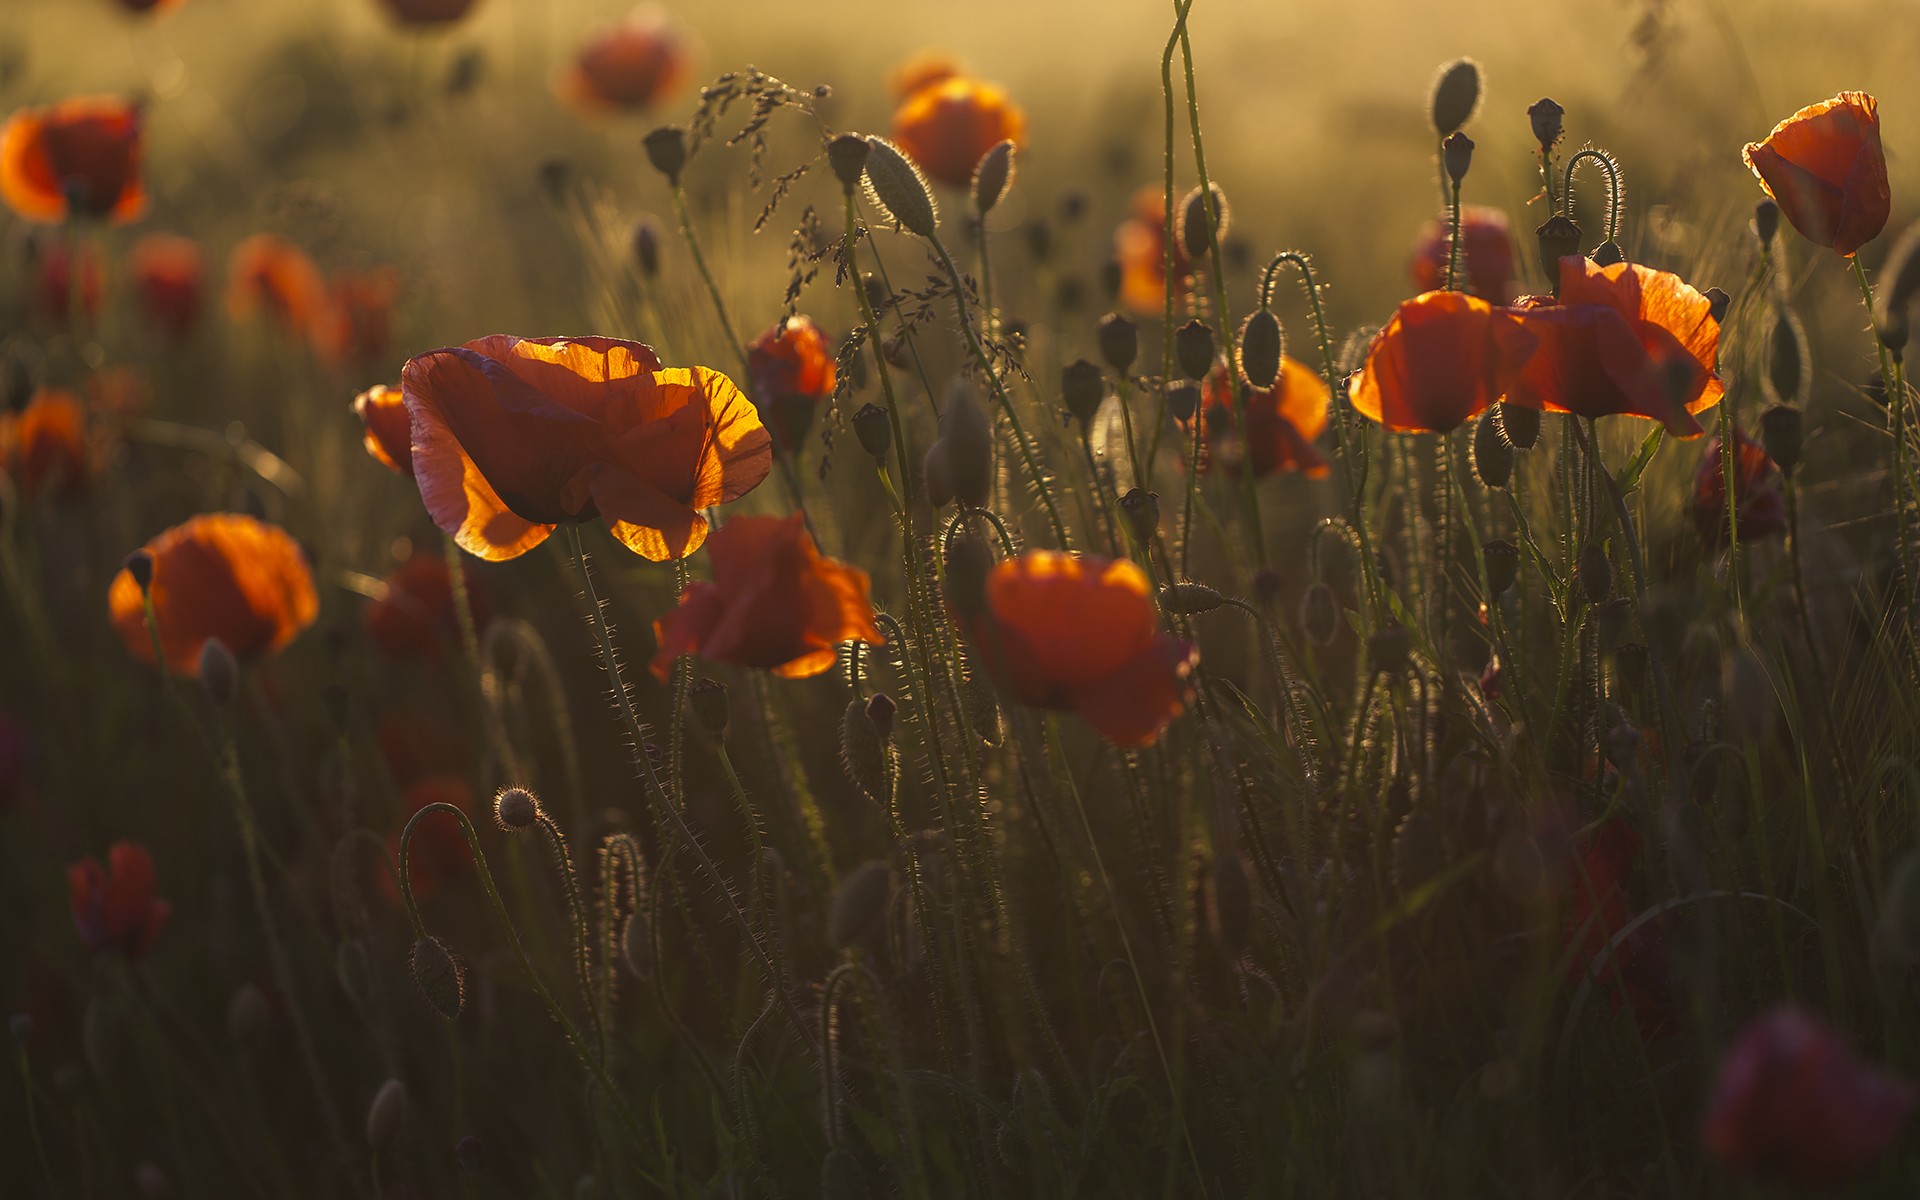 General 1920x1200 plants flowers poppies red flowers nature low light closeup